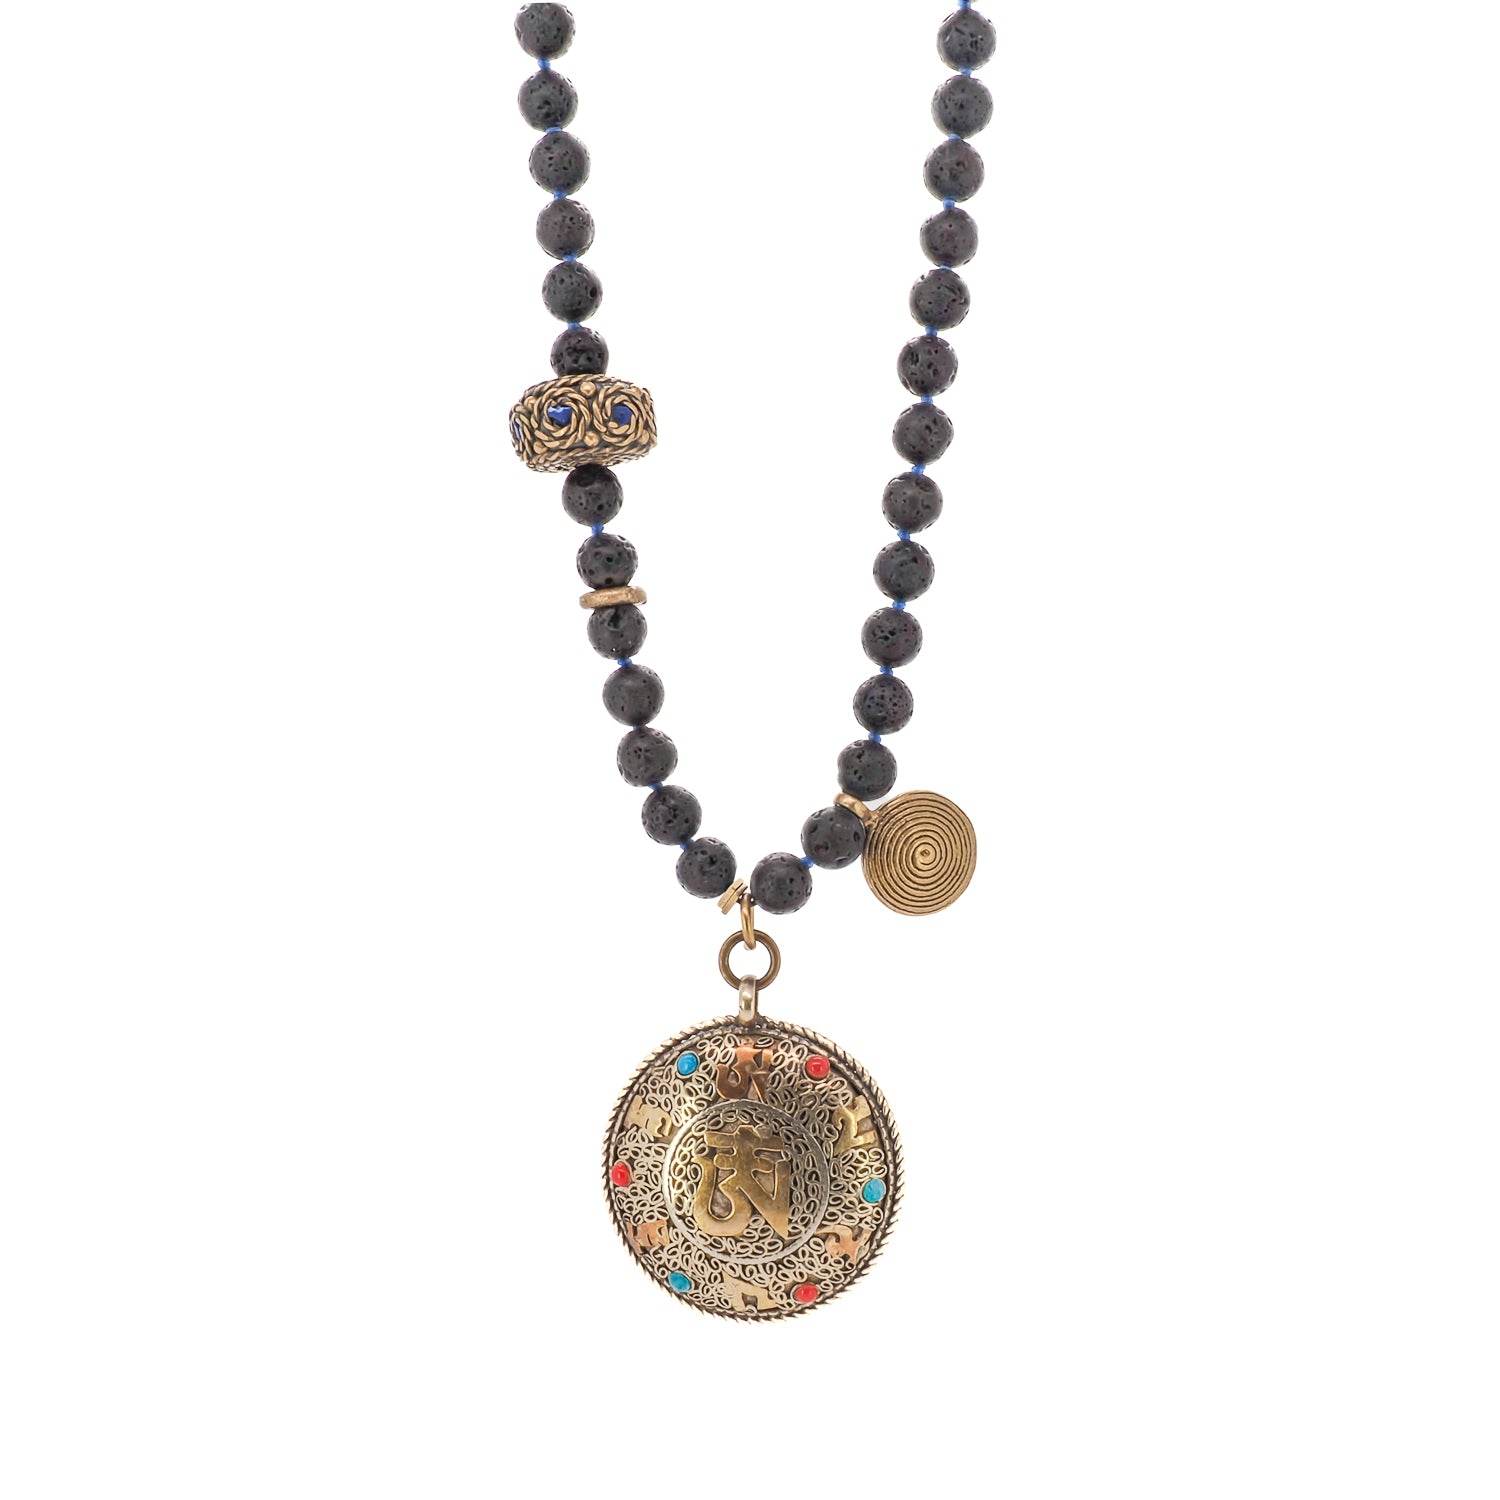 Black Nepal Om Mala Mantra Necklace: Handcrafted with Natural Lava Rock Stone Beads